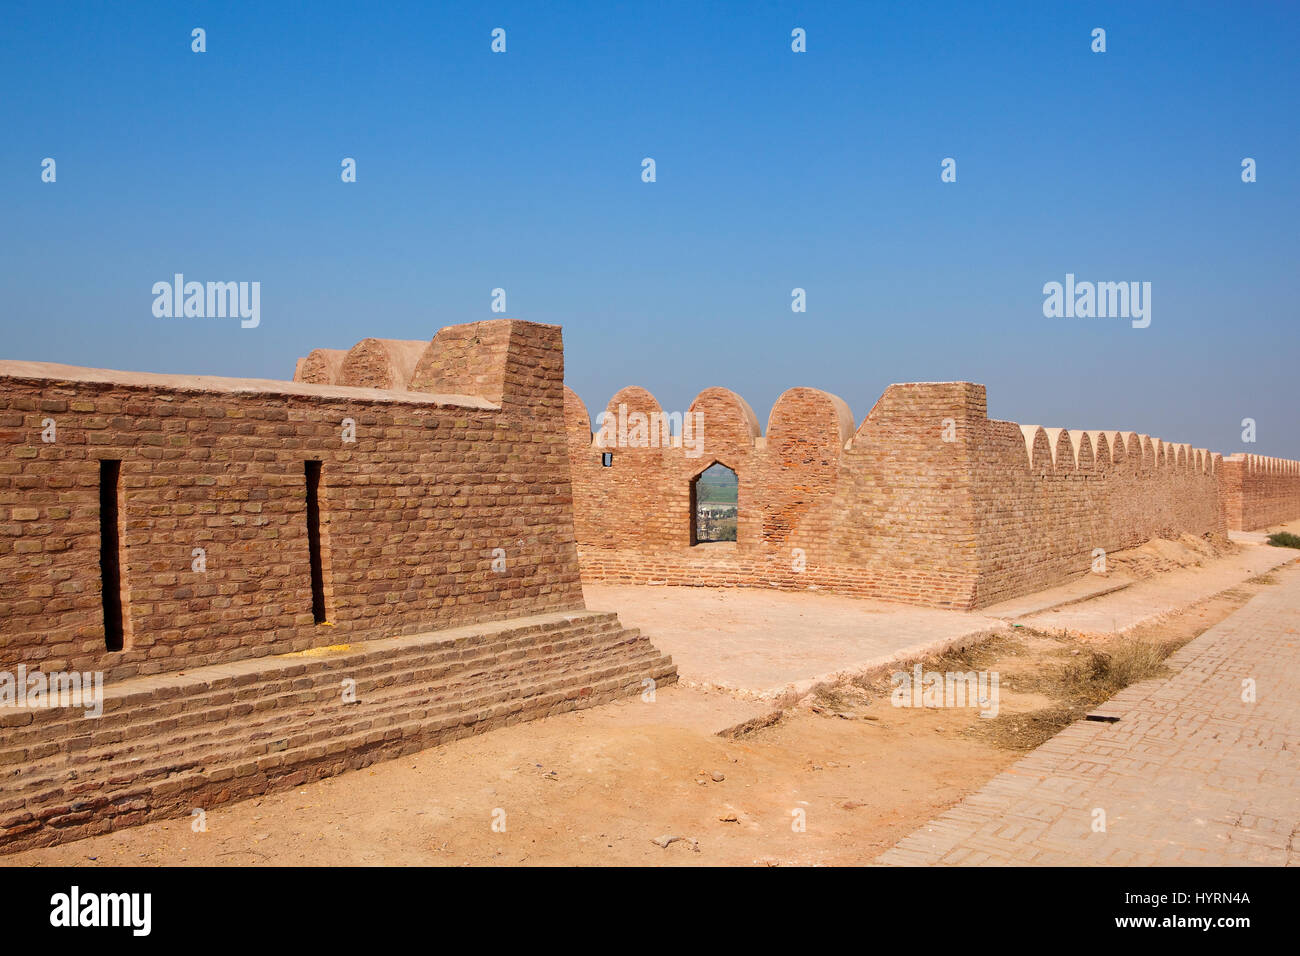 the restoration work at bhatner fort hanumangarh rajasthan india under a clear blue sky Stock Photo